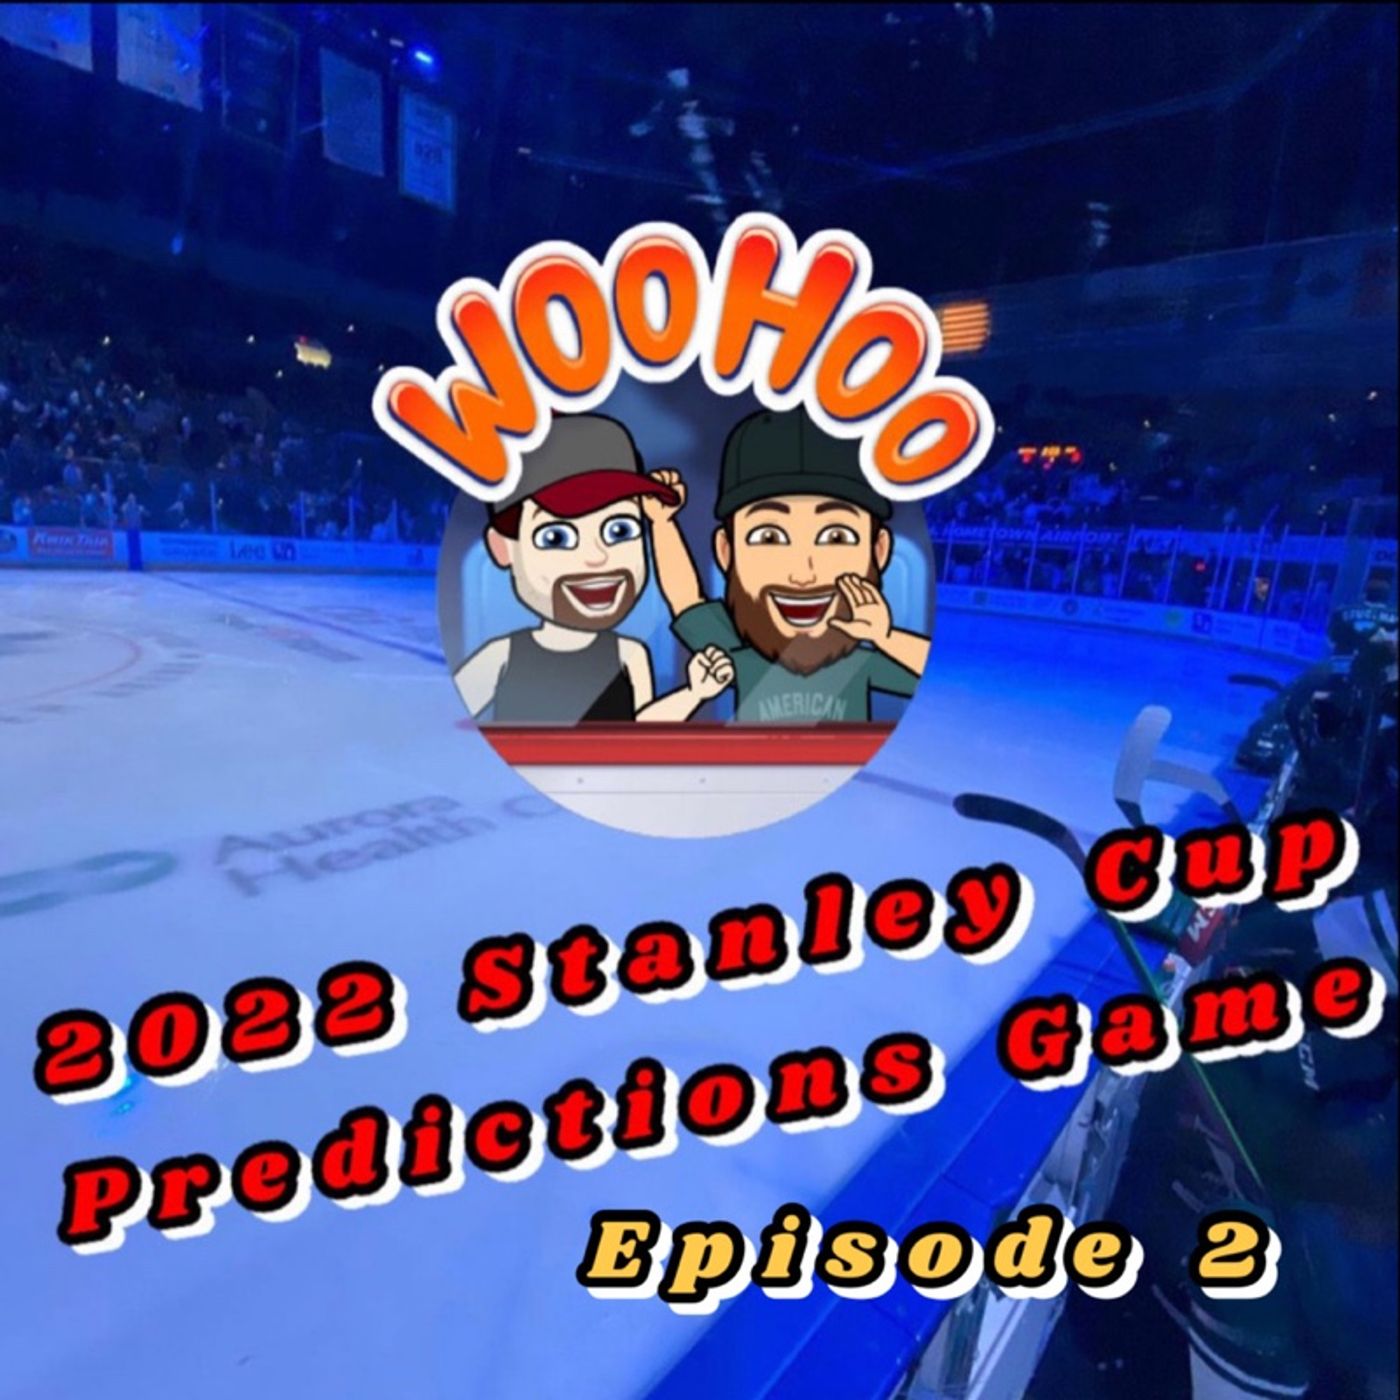 2022 Stanley Cup Predictions Game Episode 2